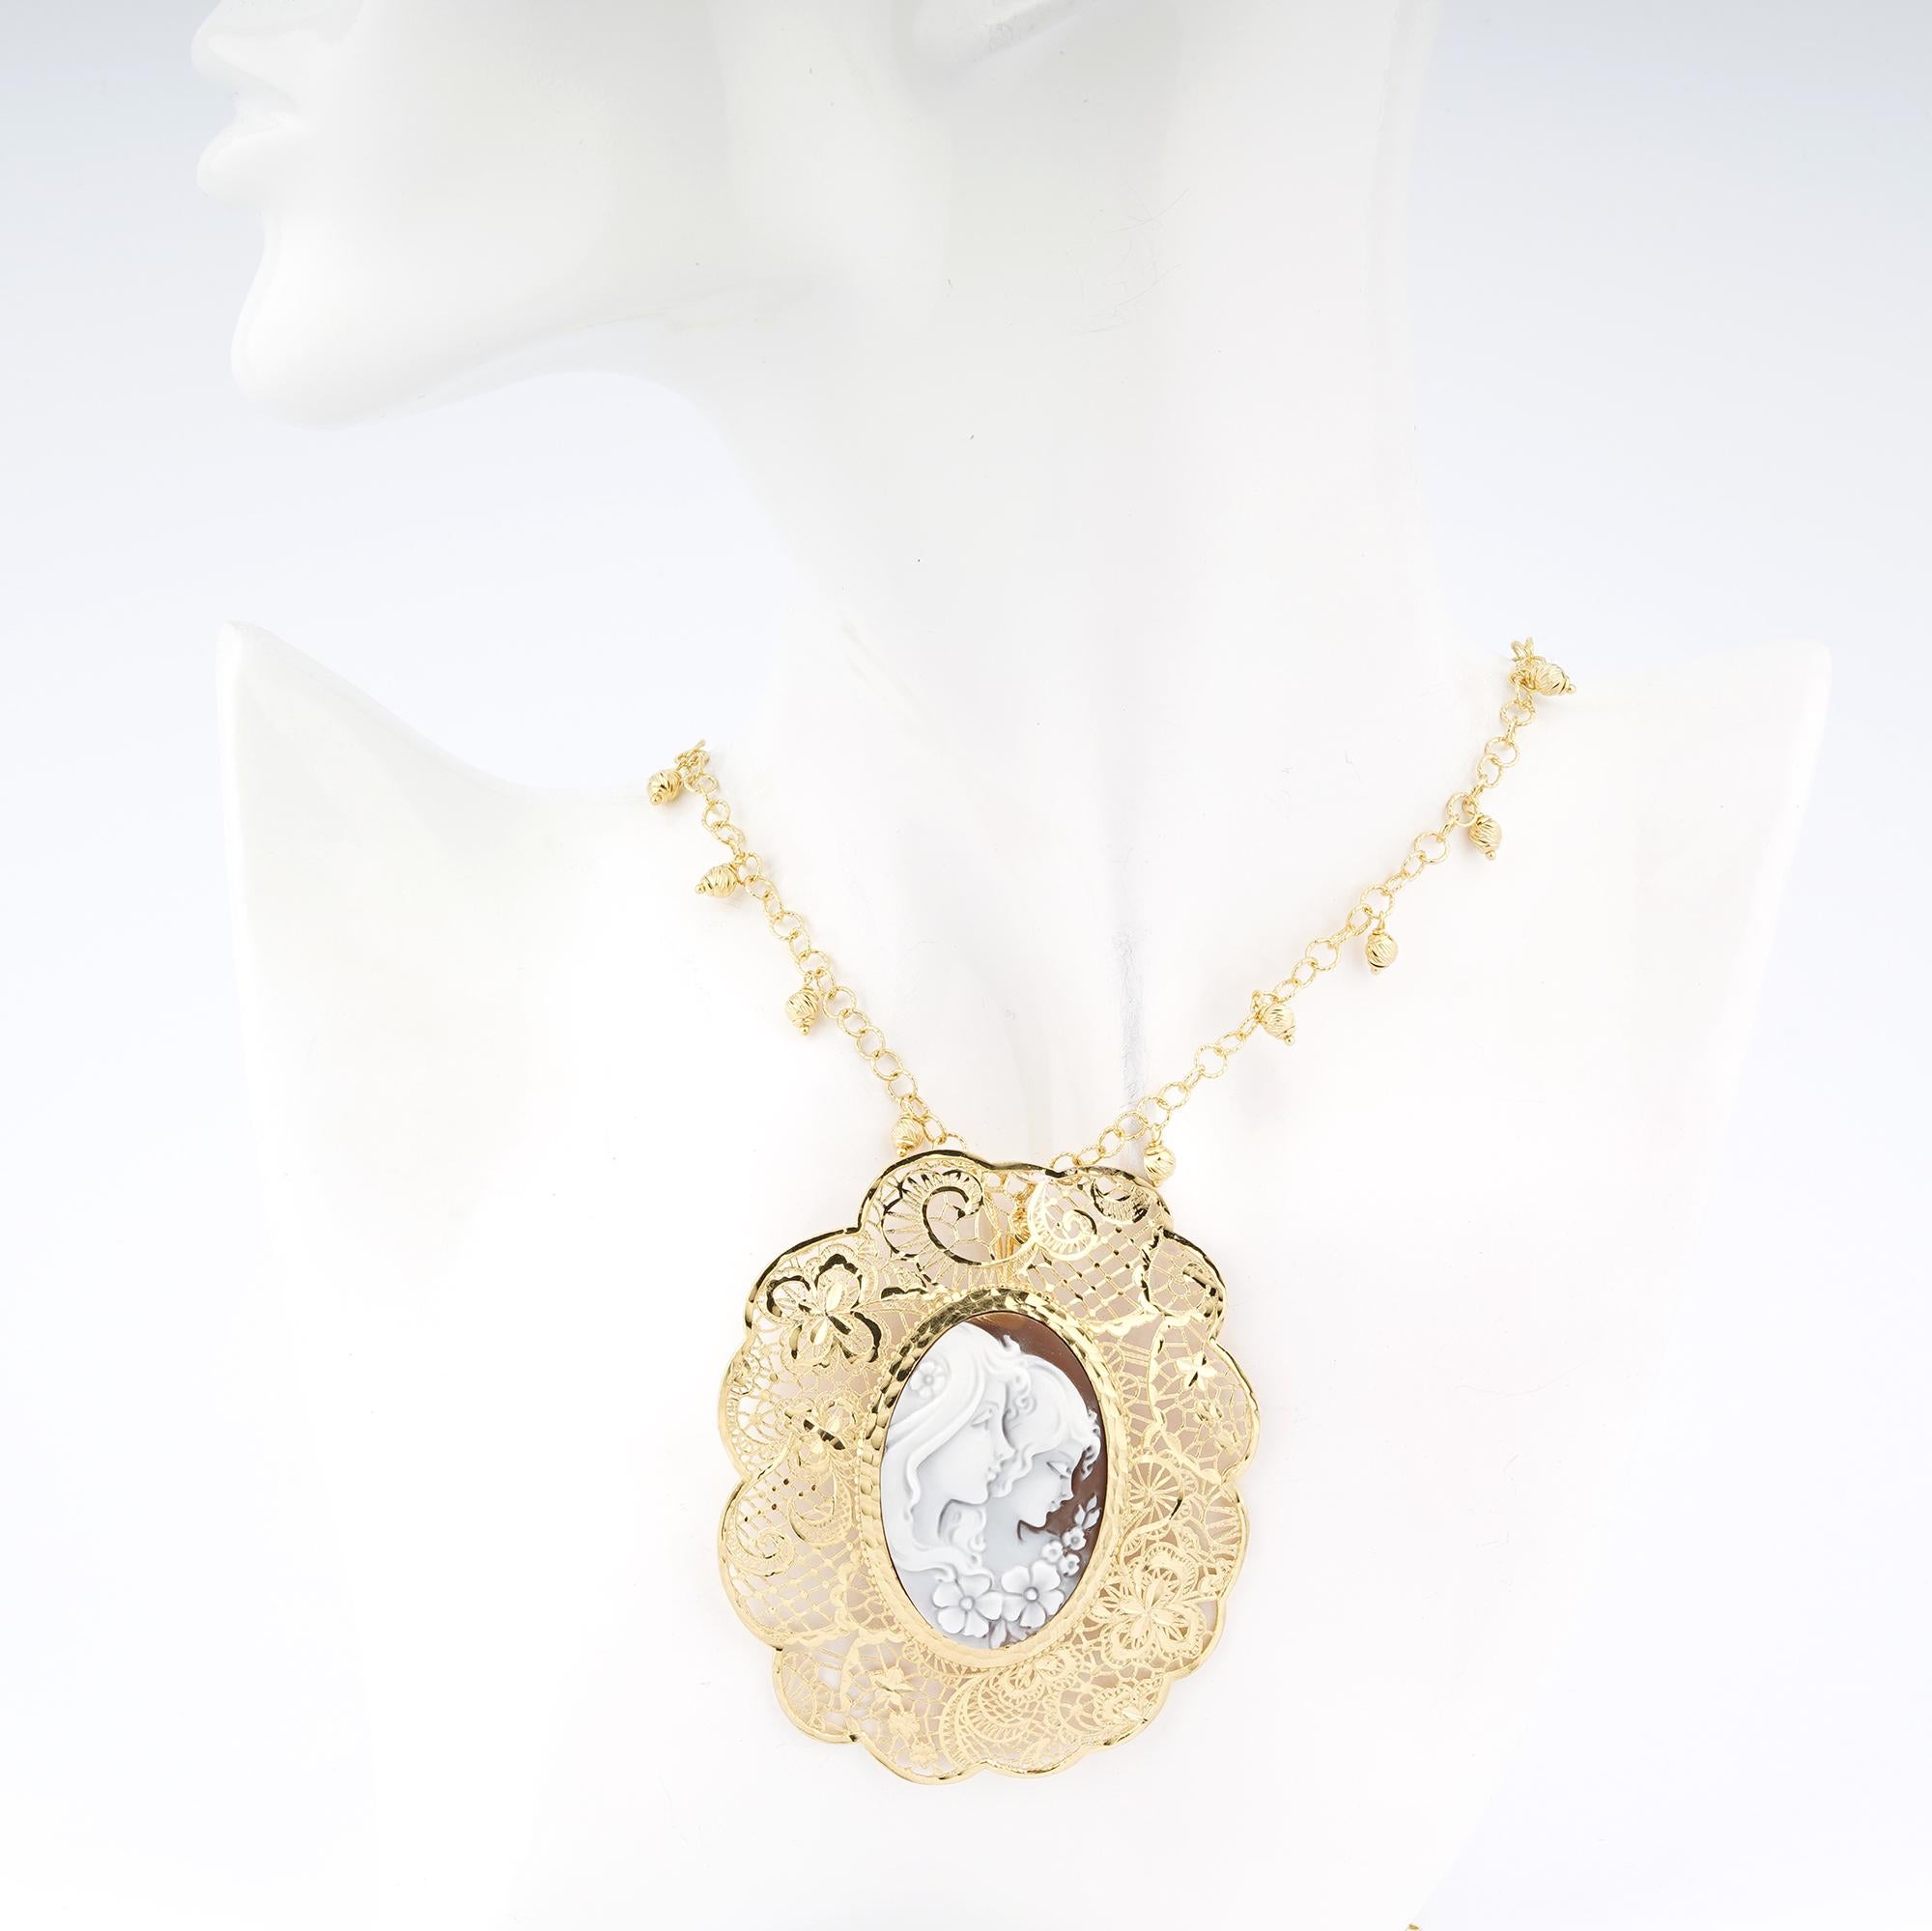 18 carat Gold Plated 925 Sterling Silver Sea Shell with 40mm Cameo Necklace 76cm. Fully handcarved Portrait on a sea shell cameo set in a 18kt Gold plated silver pendant necklace. Carvings are performed by our master artisans with generations of